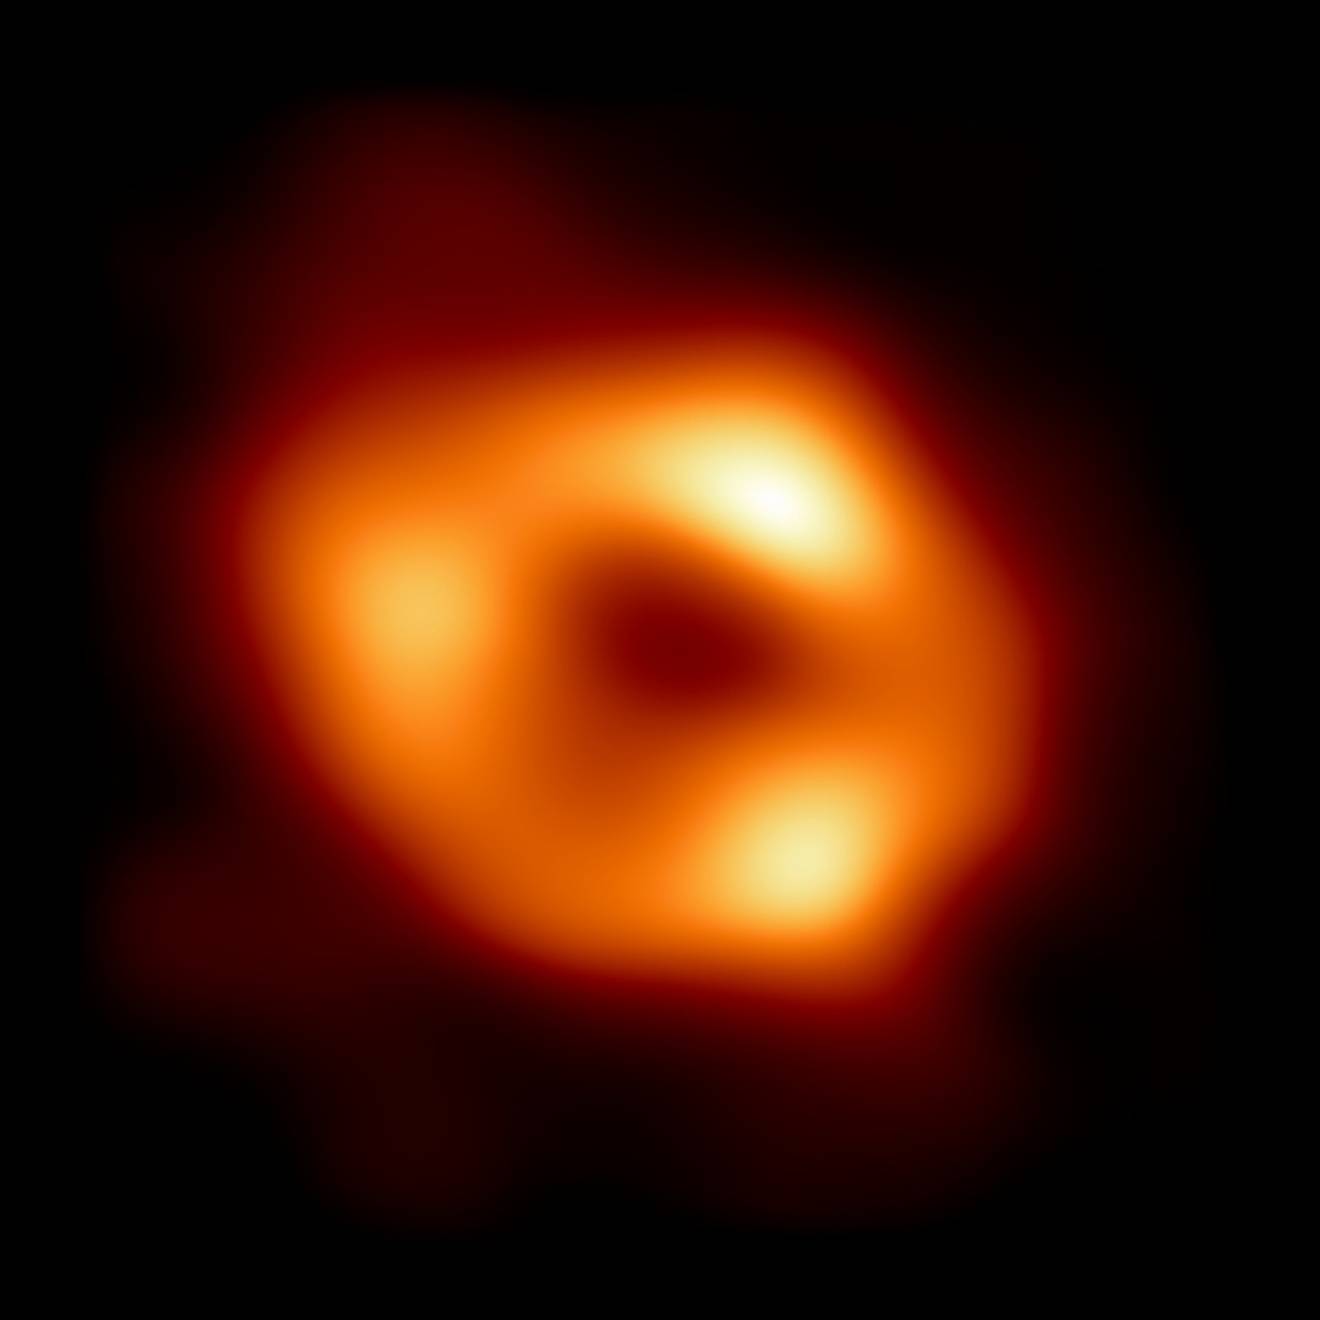 The first image of Sagittarius A* (or Sgr A* for short), the supermassive black hole at the centre of our galaxy. Fiery red circular object on black